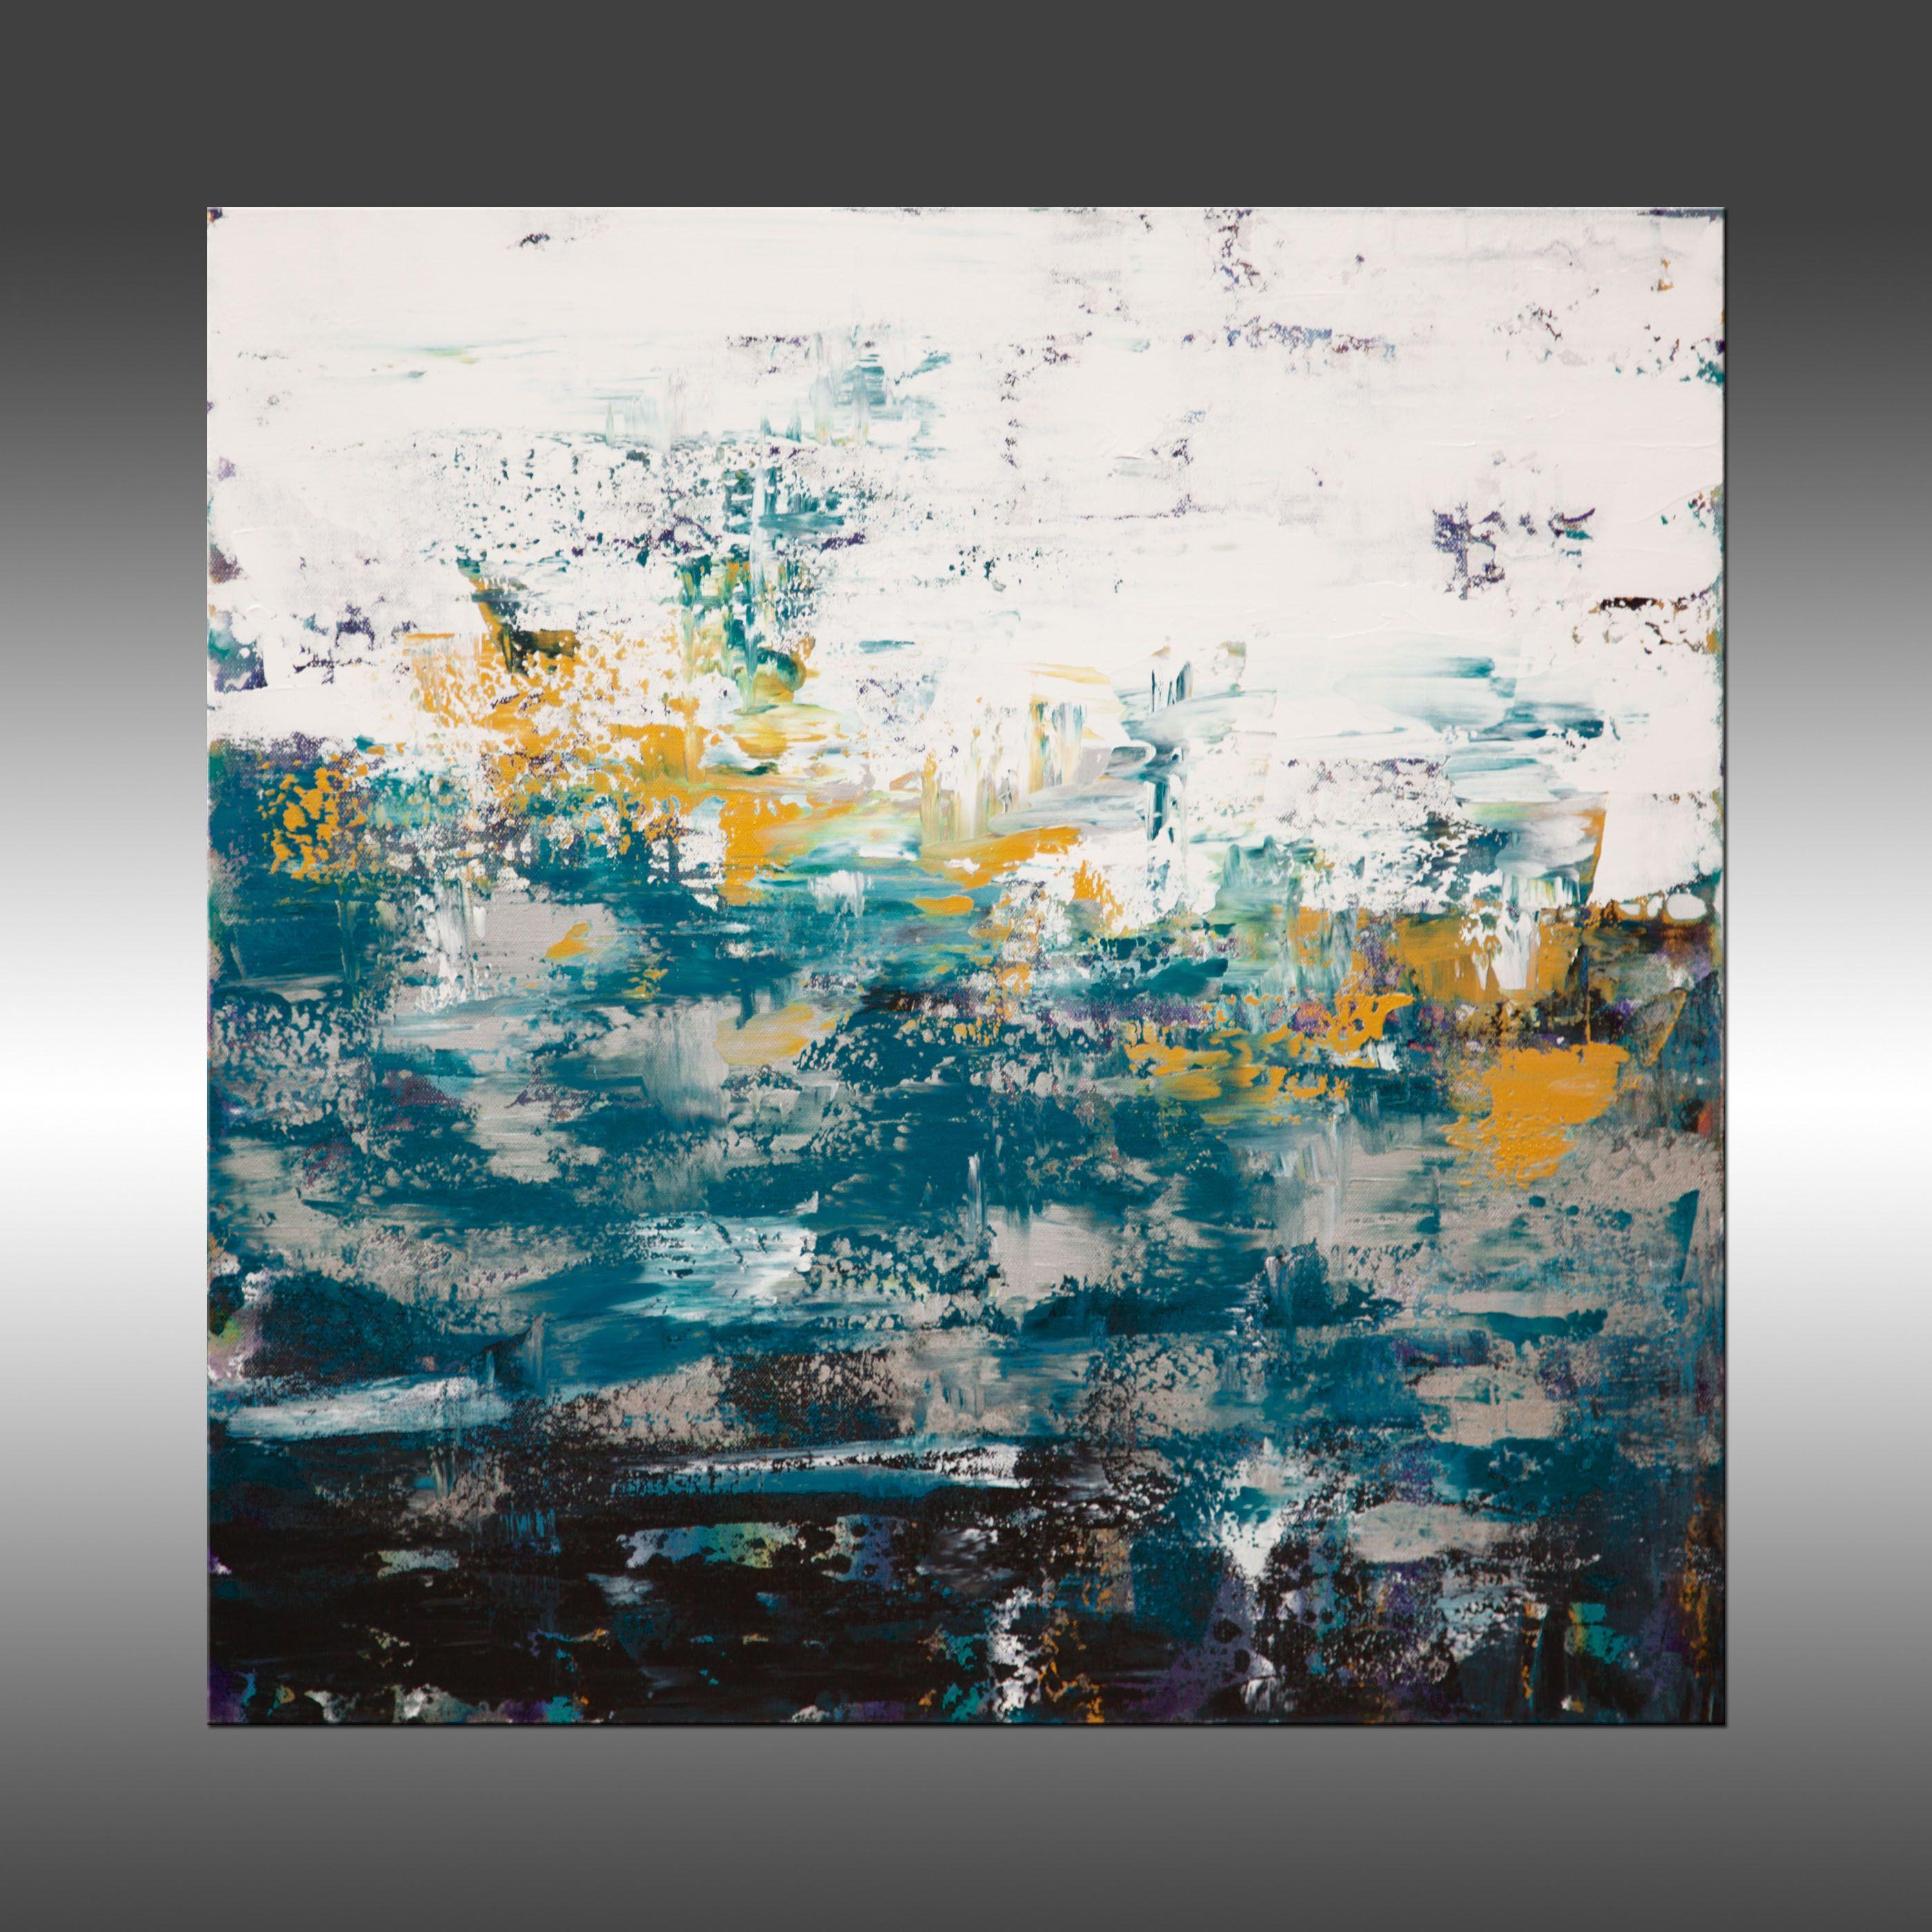 Ascension 17 is an original painting, created with acrylic paint on gallery-wrapped canvas. It has a width of 24 inches and a height of 24 inches with a depth of 1.5 inches (24x24x1.5).    The colors used in the painting are white, gray, teal,